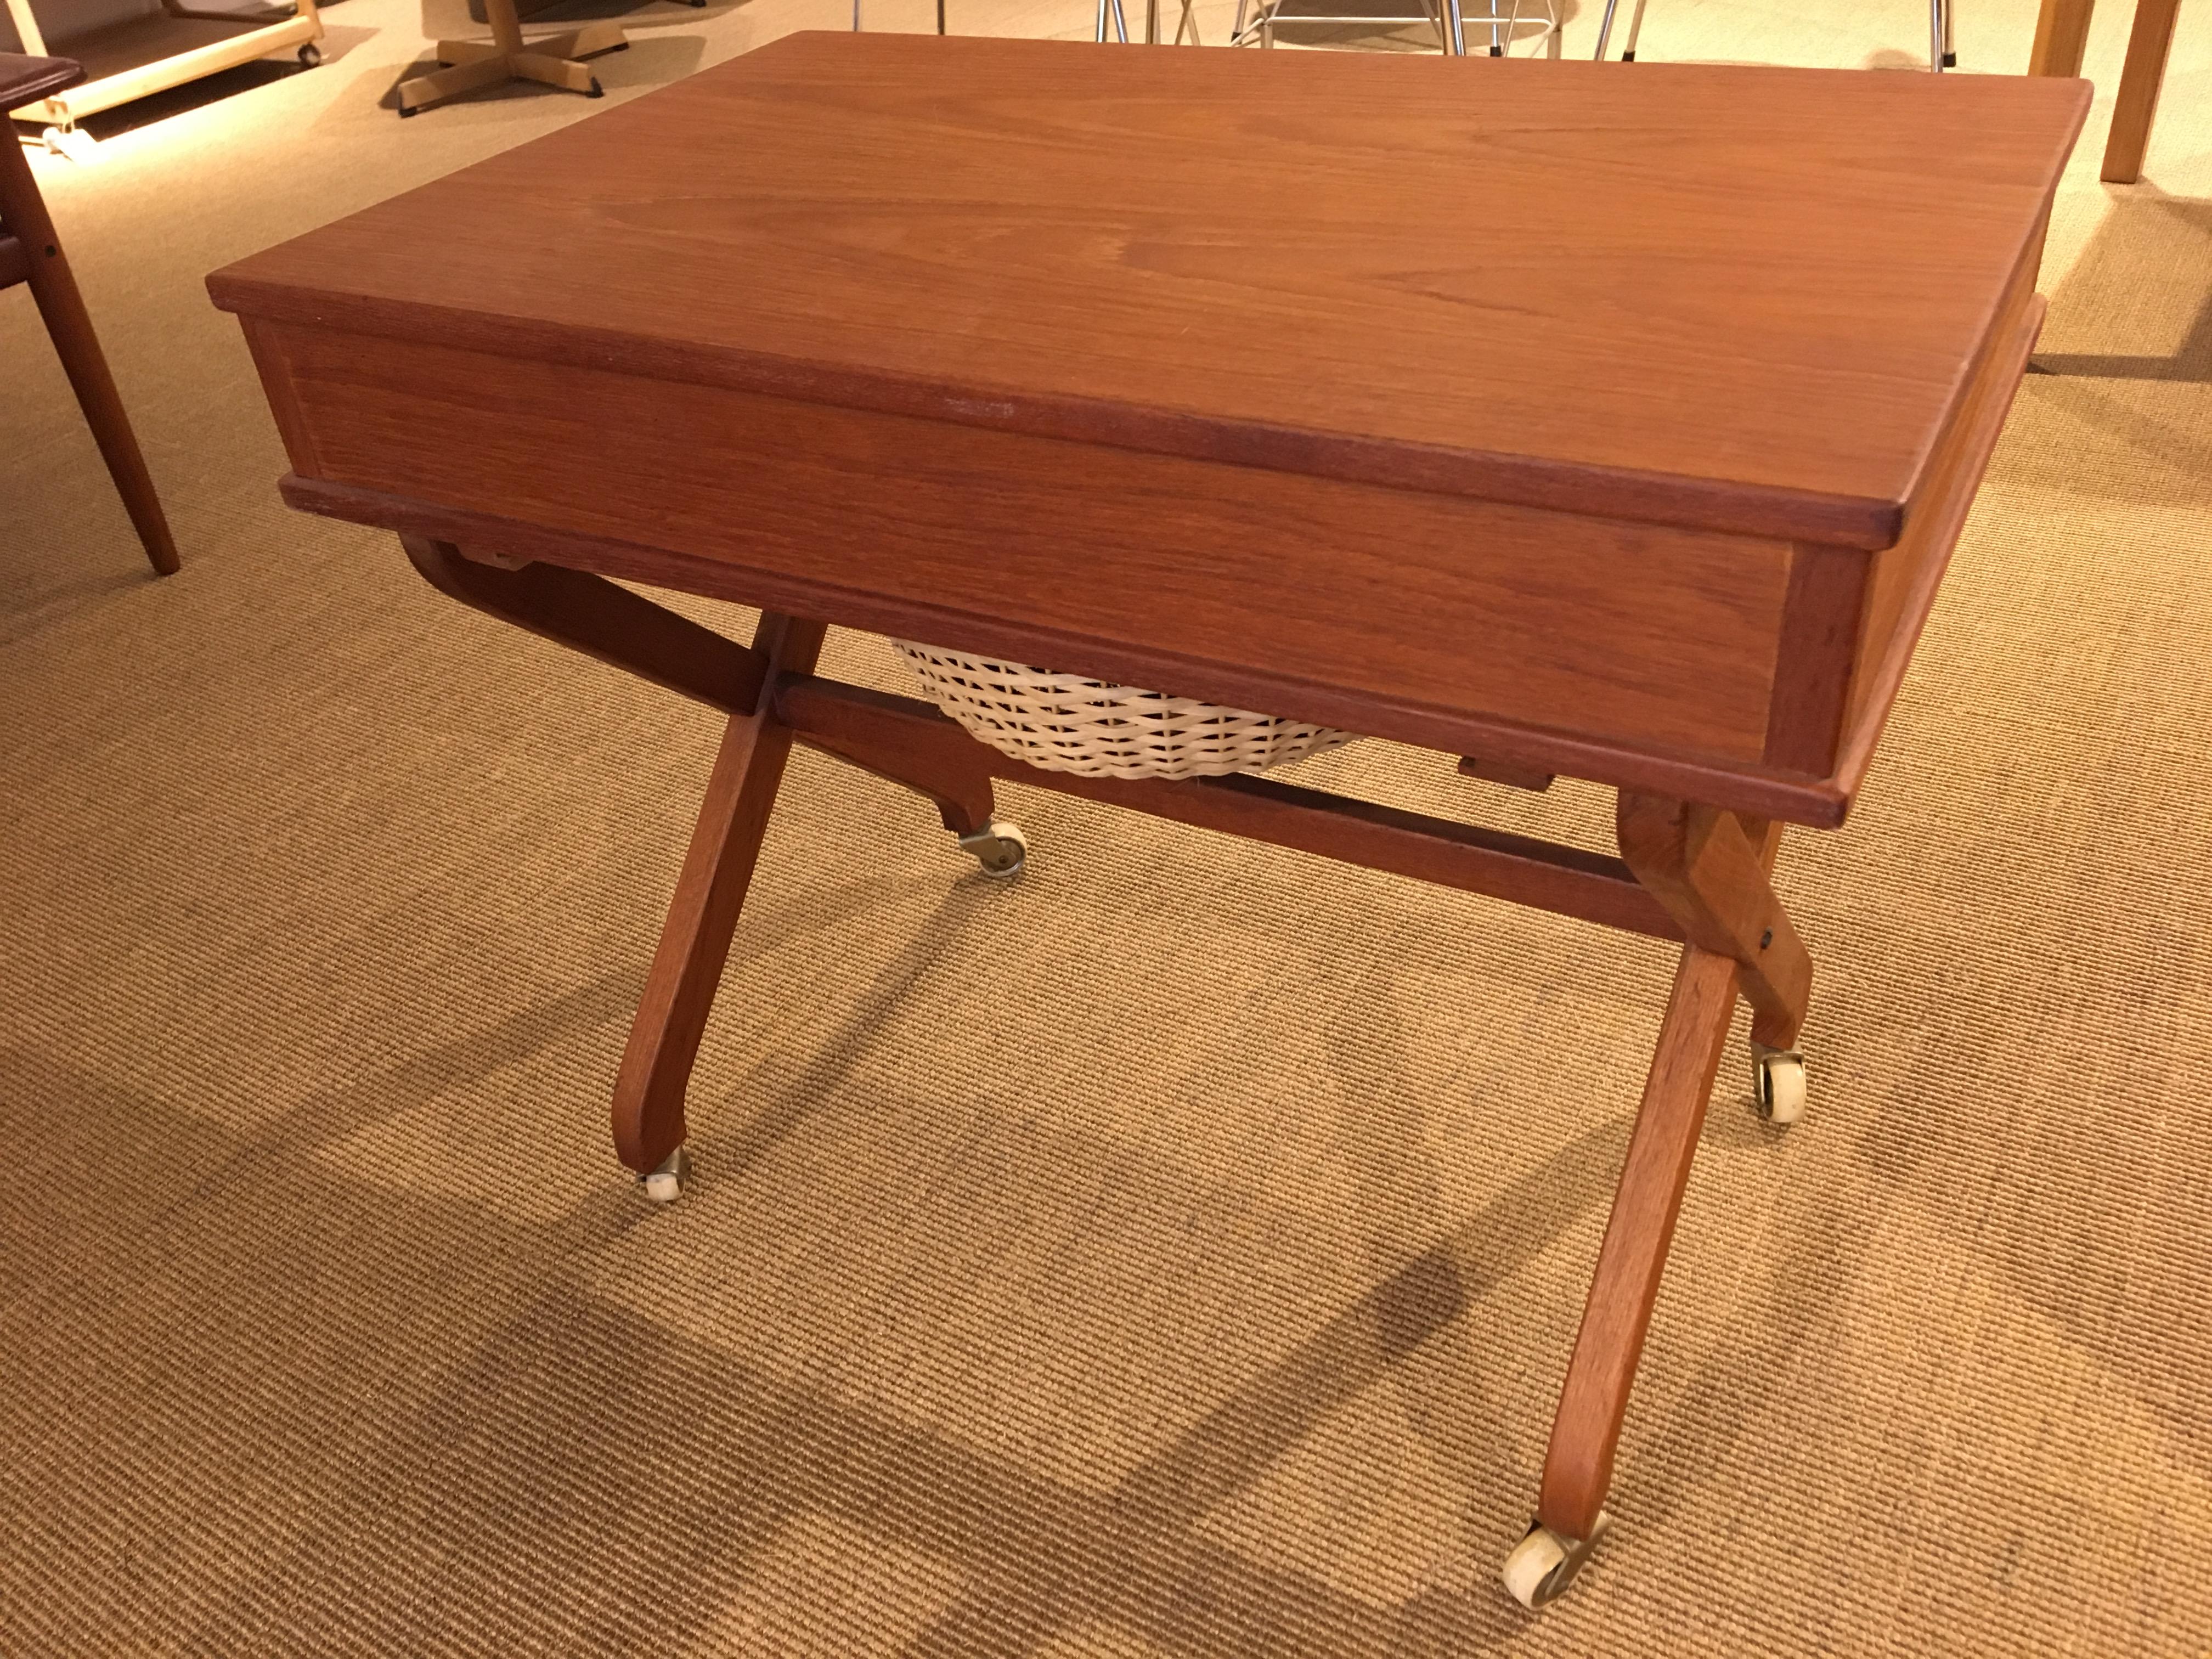 Danish Teak Sewing Table In Good Condition For Sale In Odense, Denmark